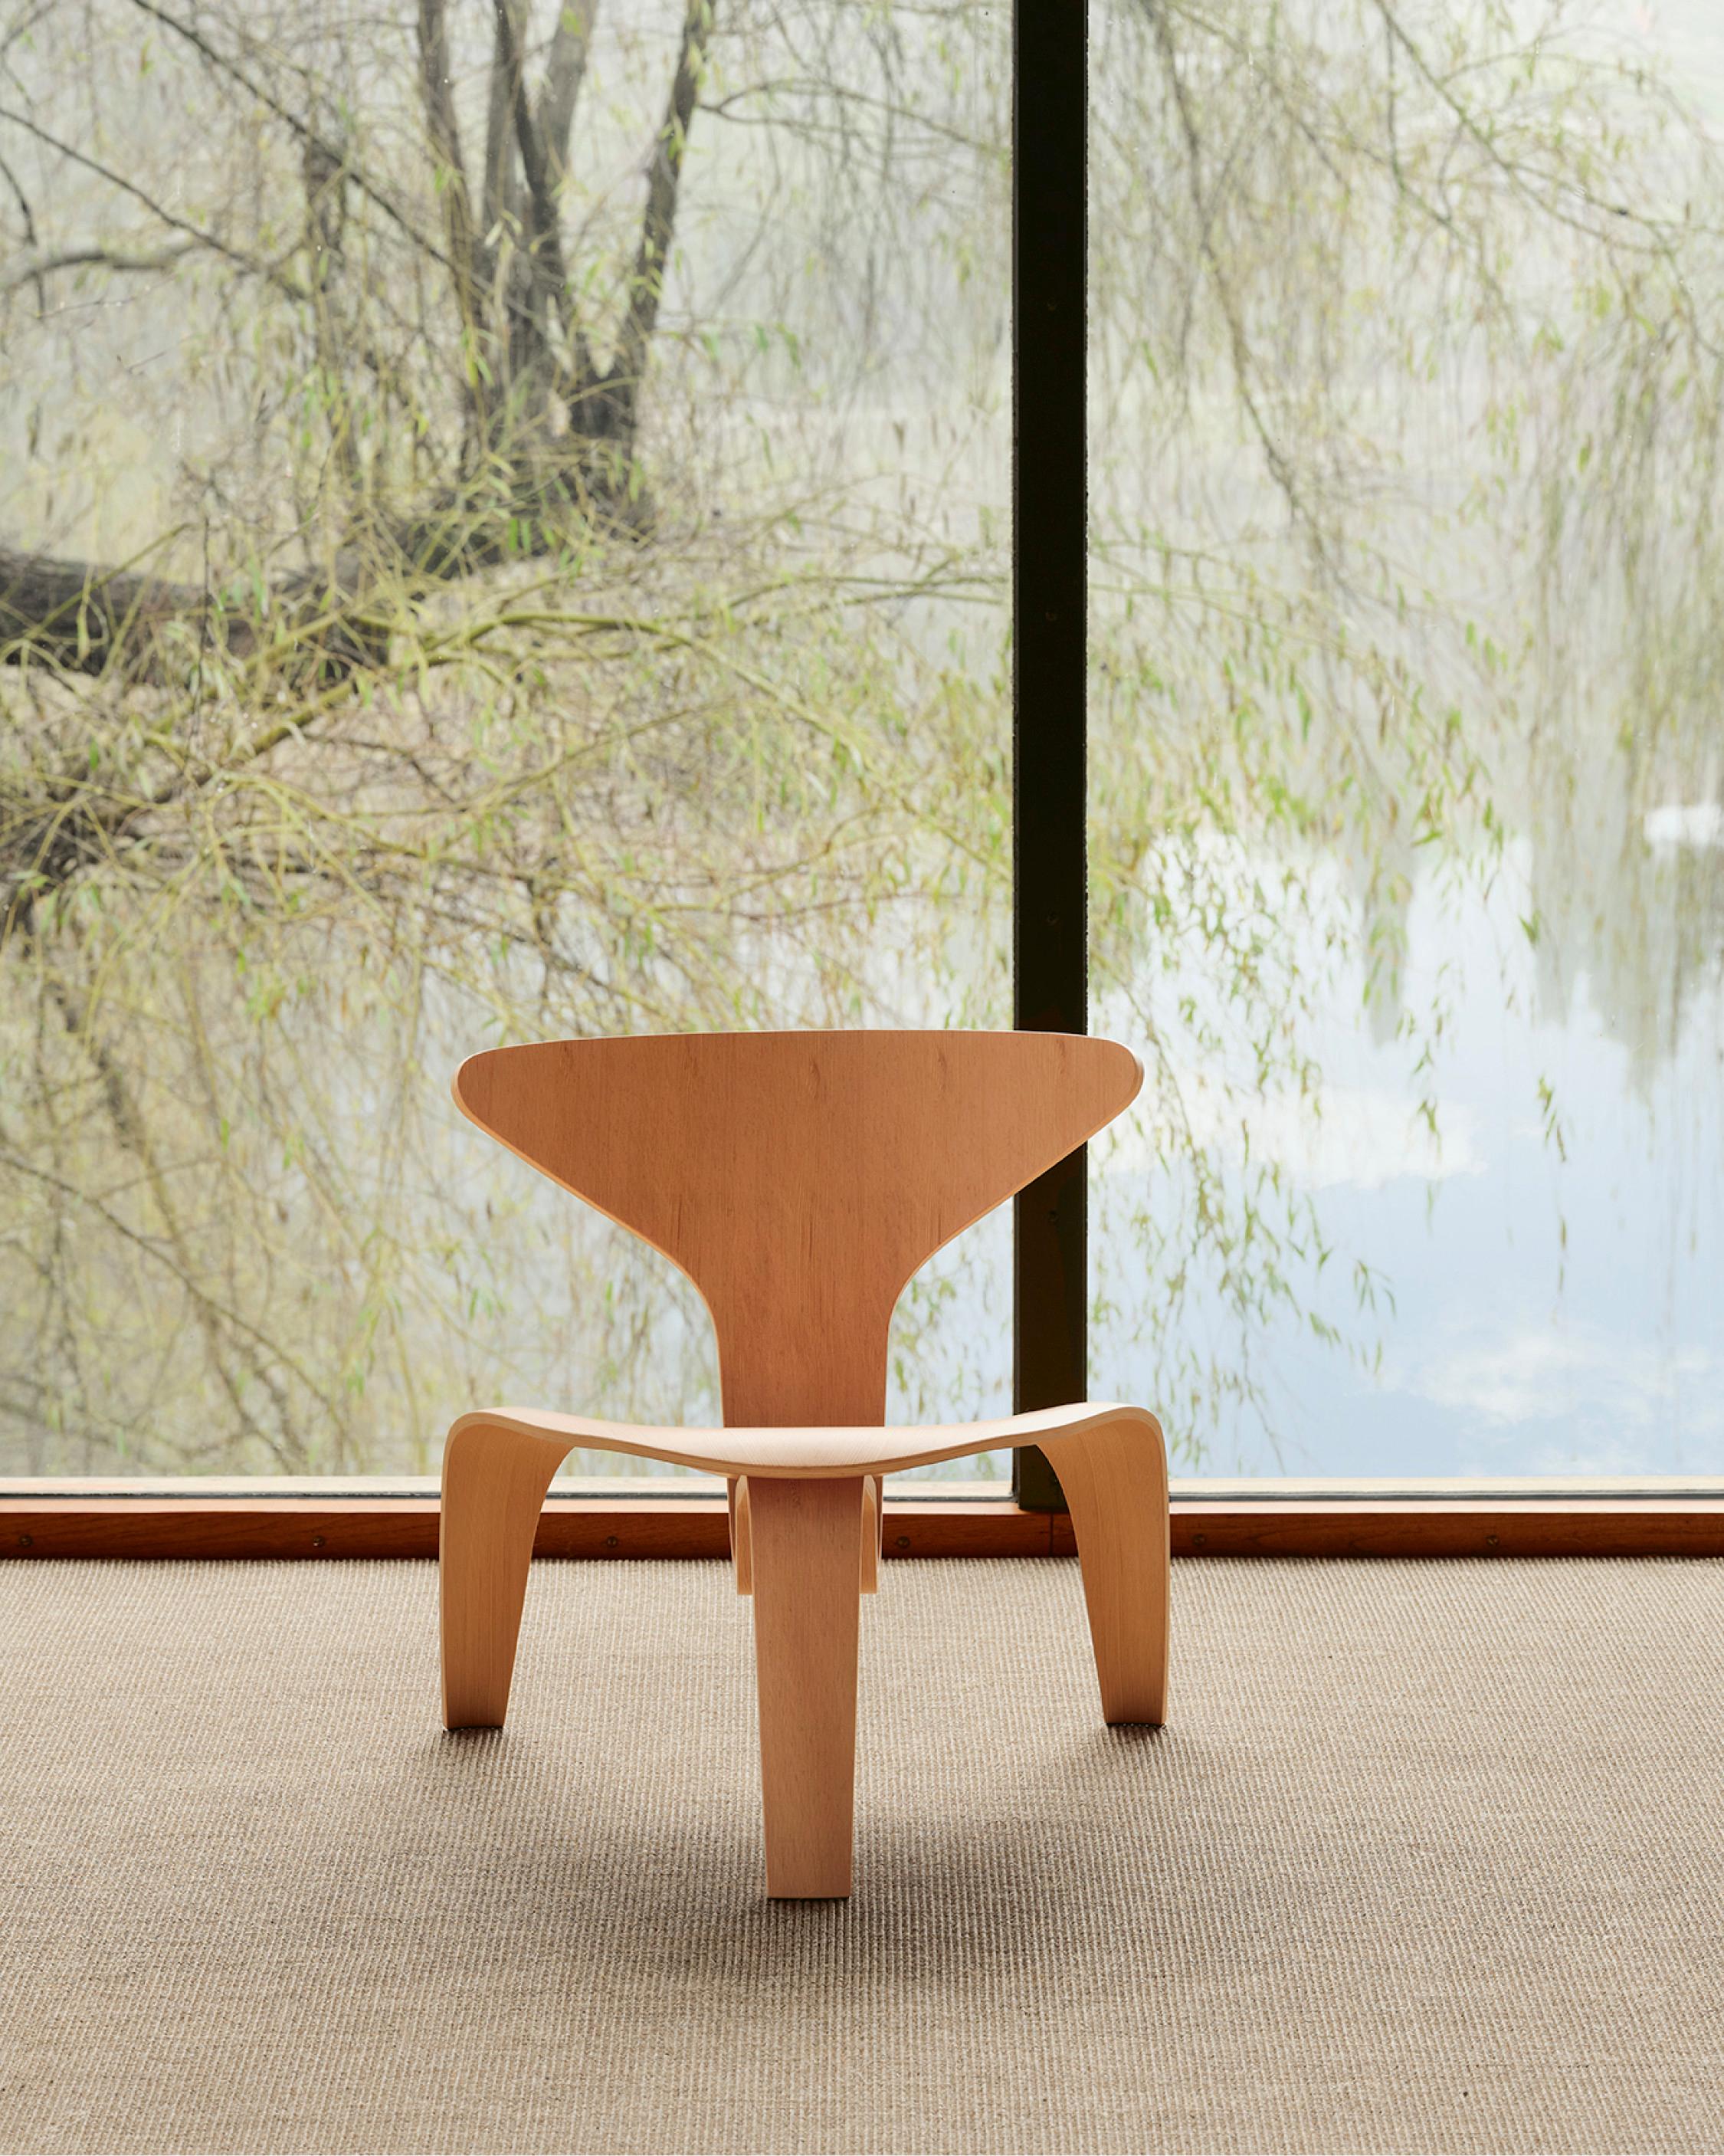 Poul Kjærholm 'PK0 A' Chair for Fritz Hansen in Oregon Pine.

Established in 1872, Fritz Hansen has become synonymous with legendary Danish design. Combining timeless craftsmanship with an emphasis on sustainability, the brand’s re-editions of